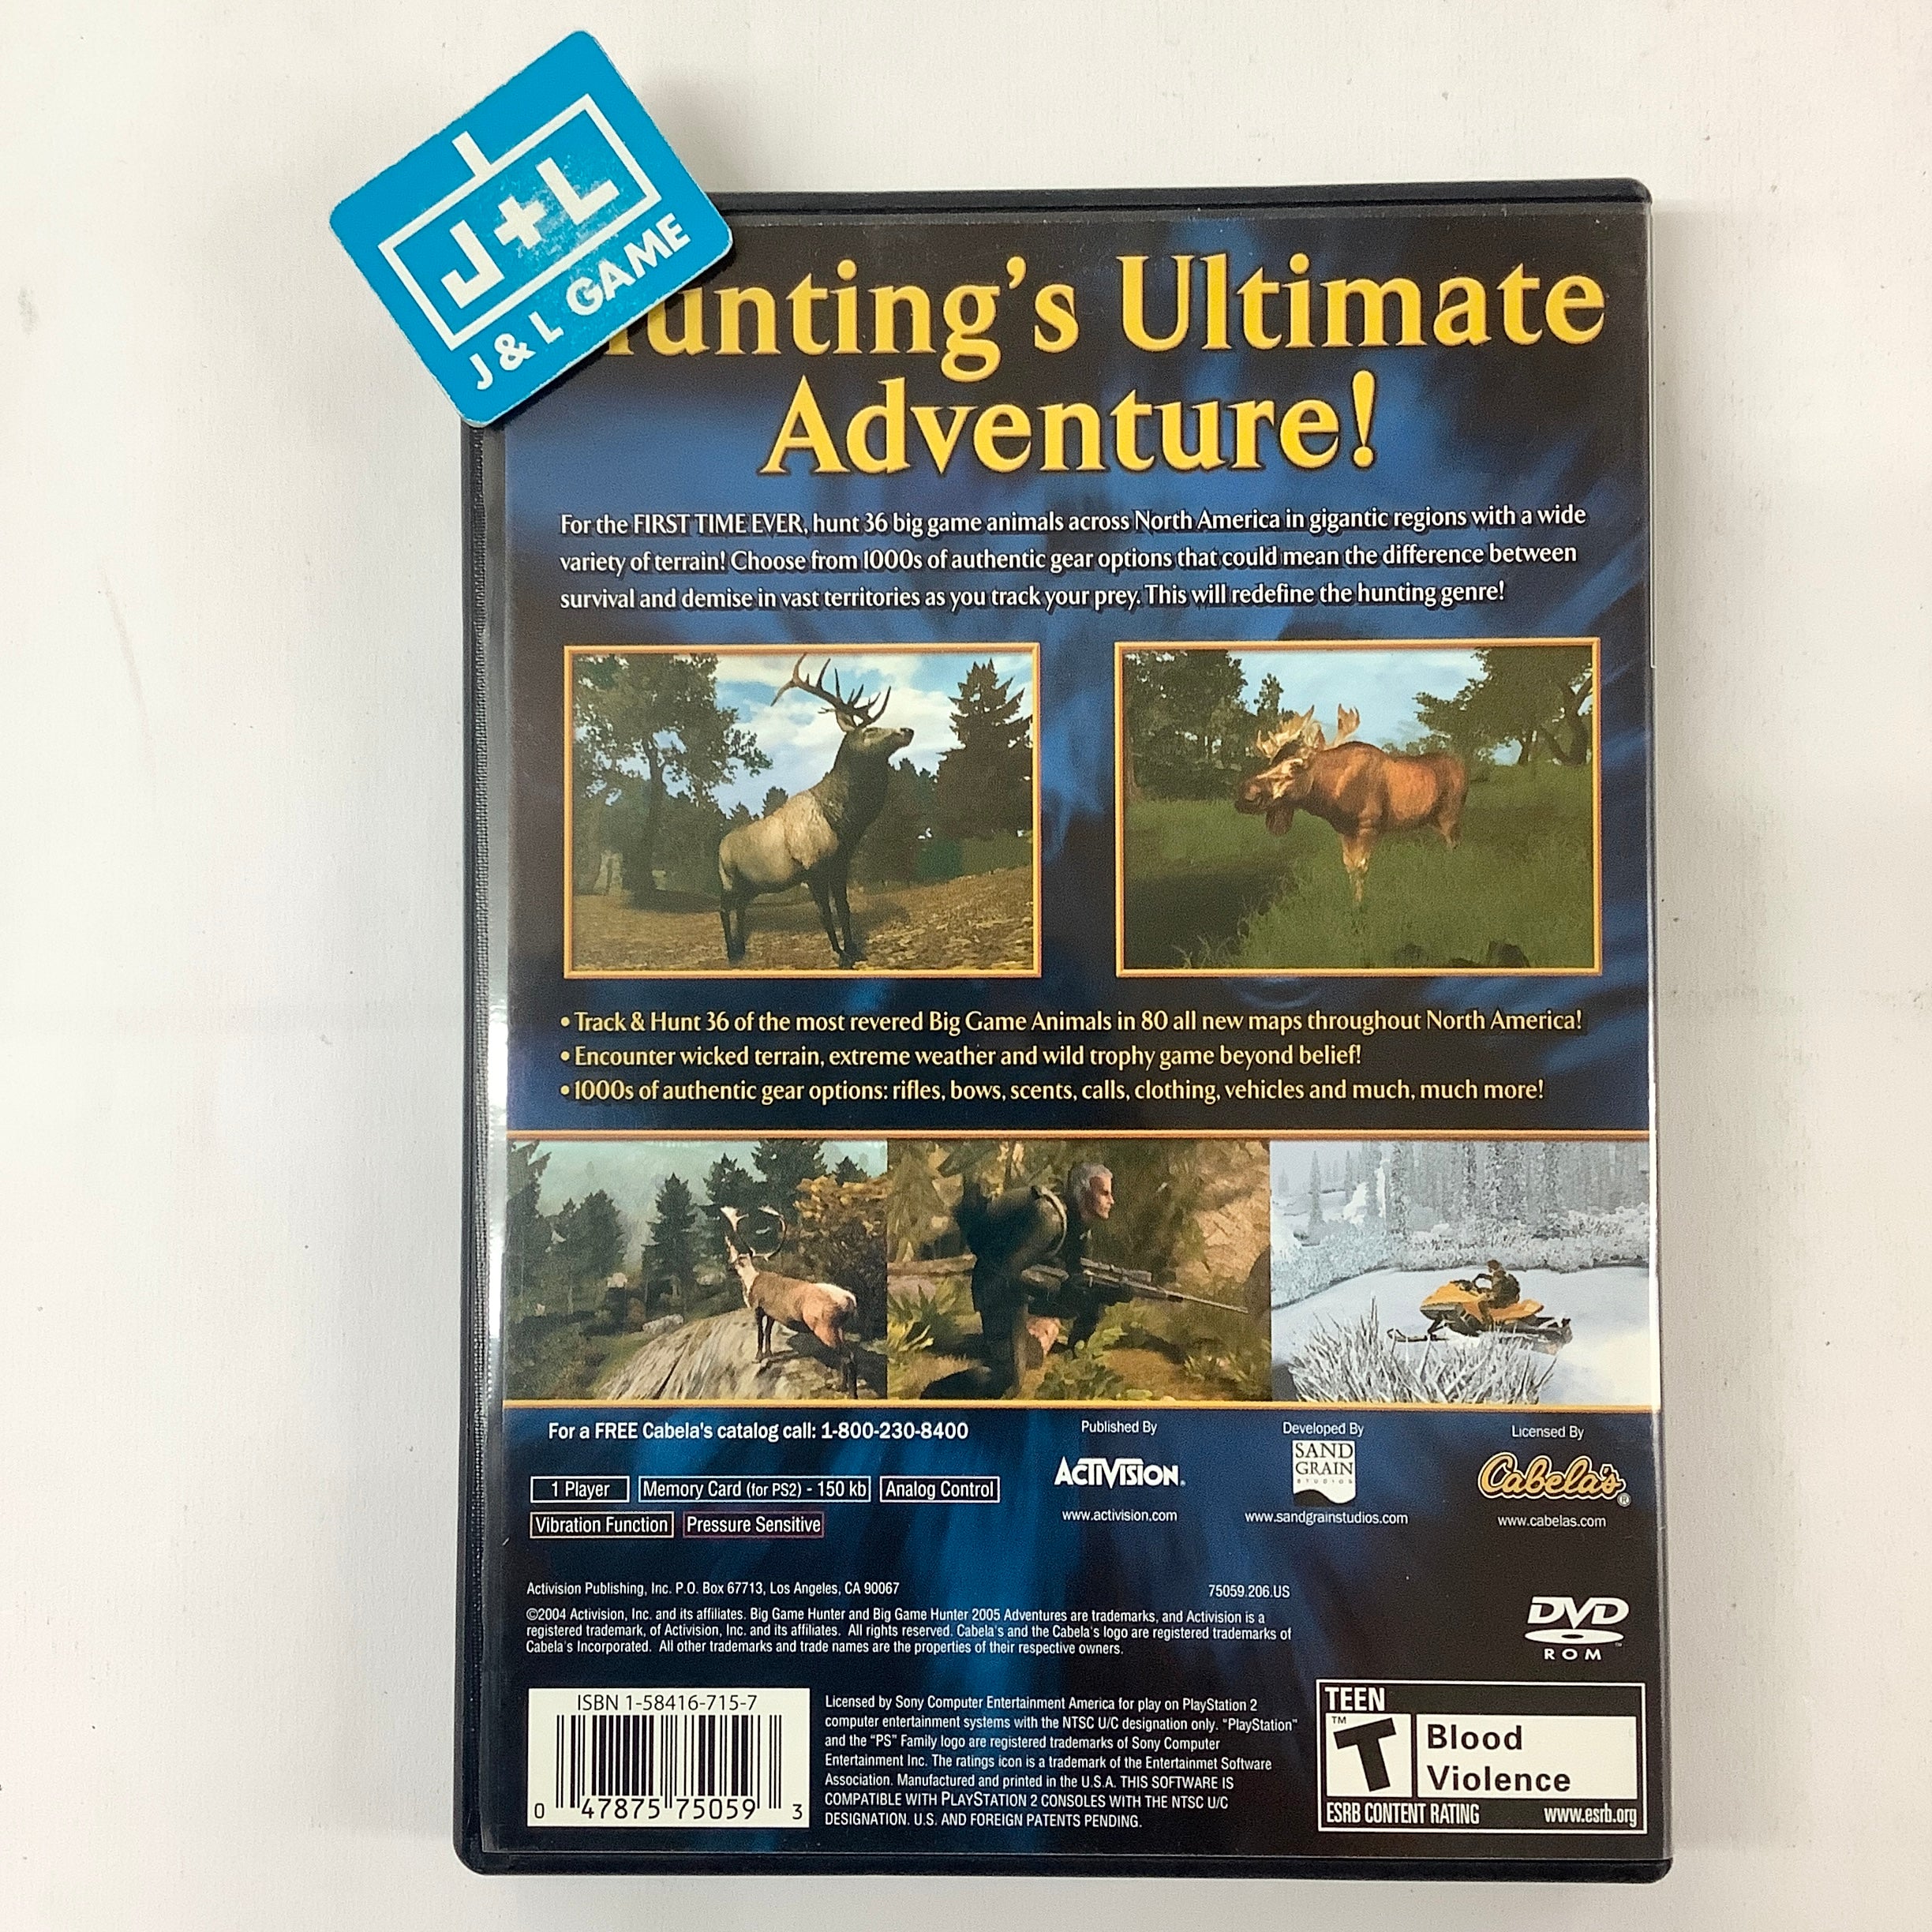 Cabela's Big Game Hunter 2005 Adventures - (PS2) PlayStation 2 [Pre-Owned] Video Games Activision   